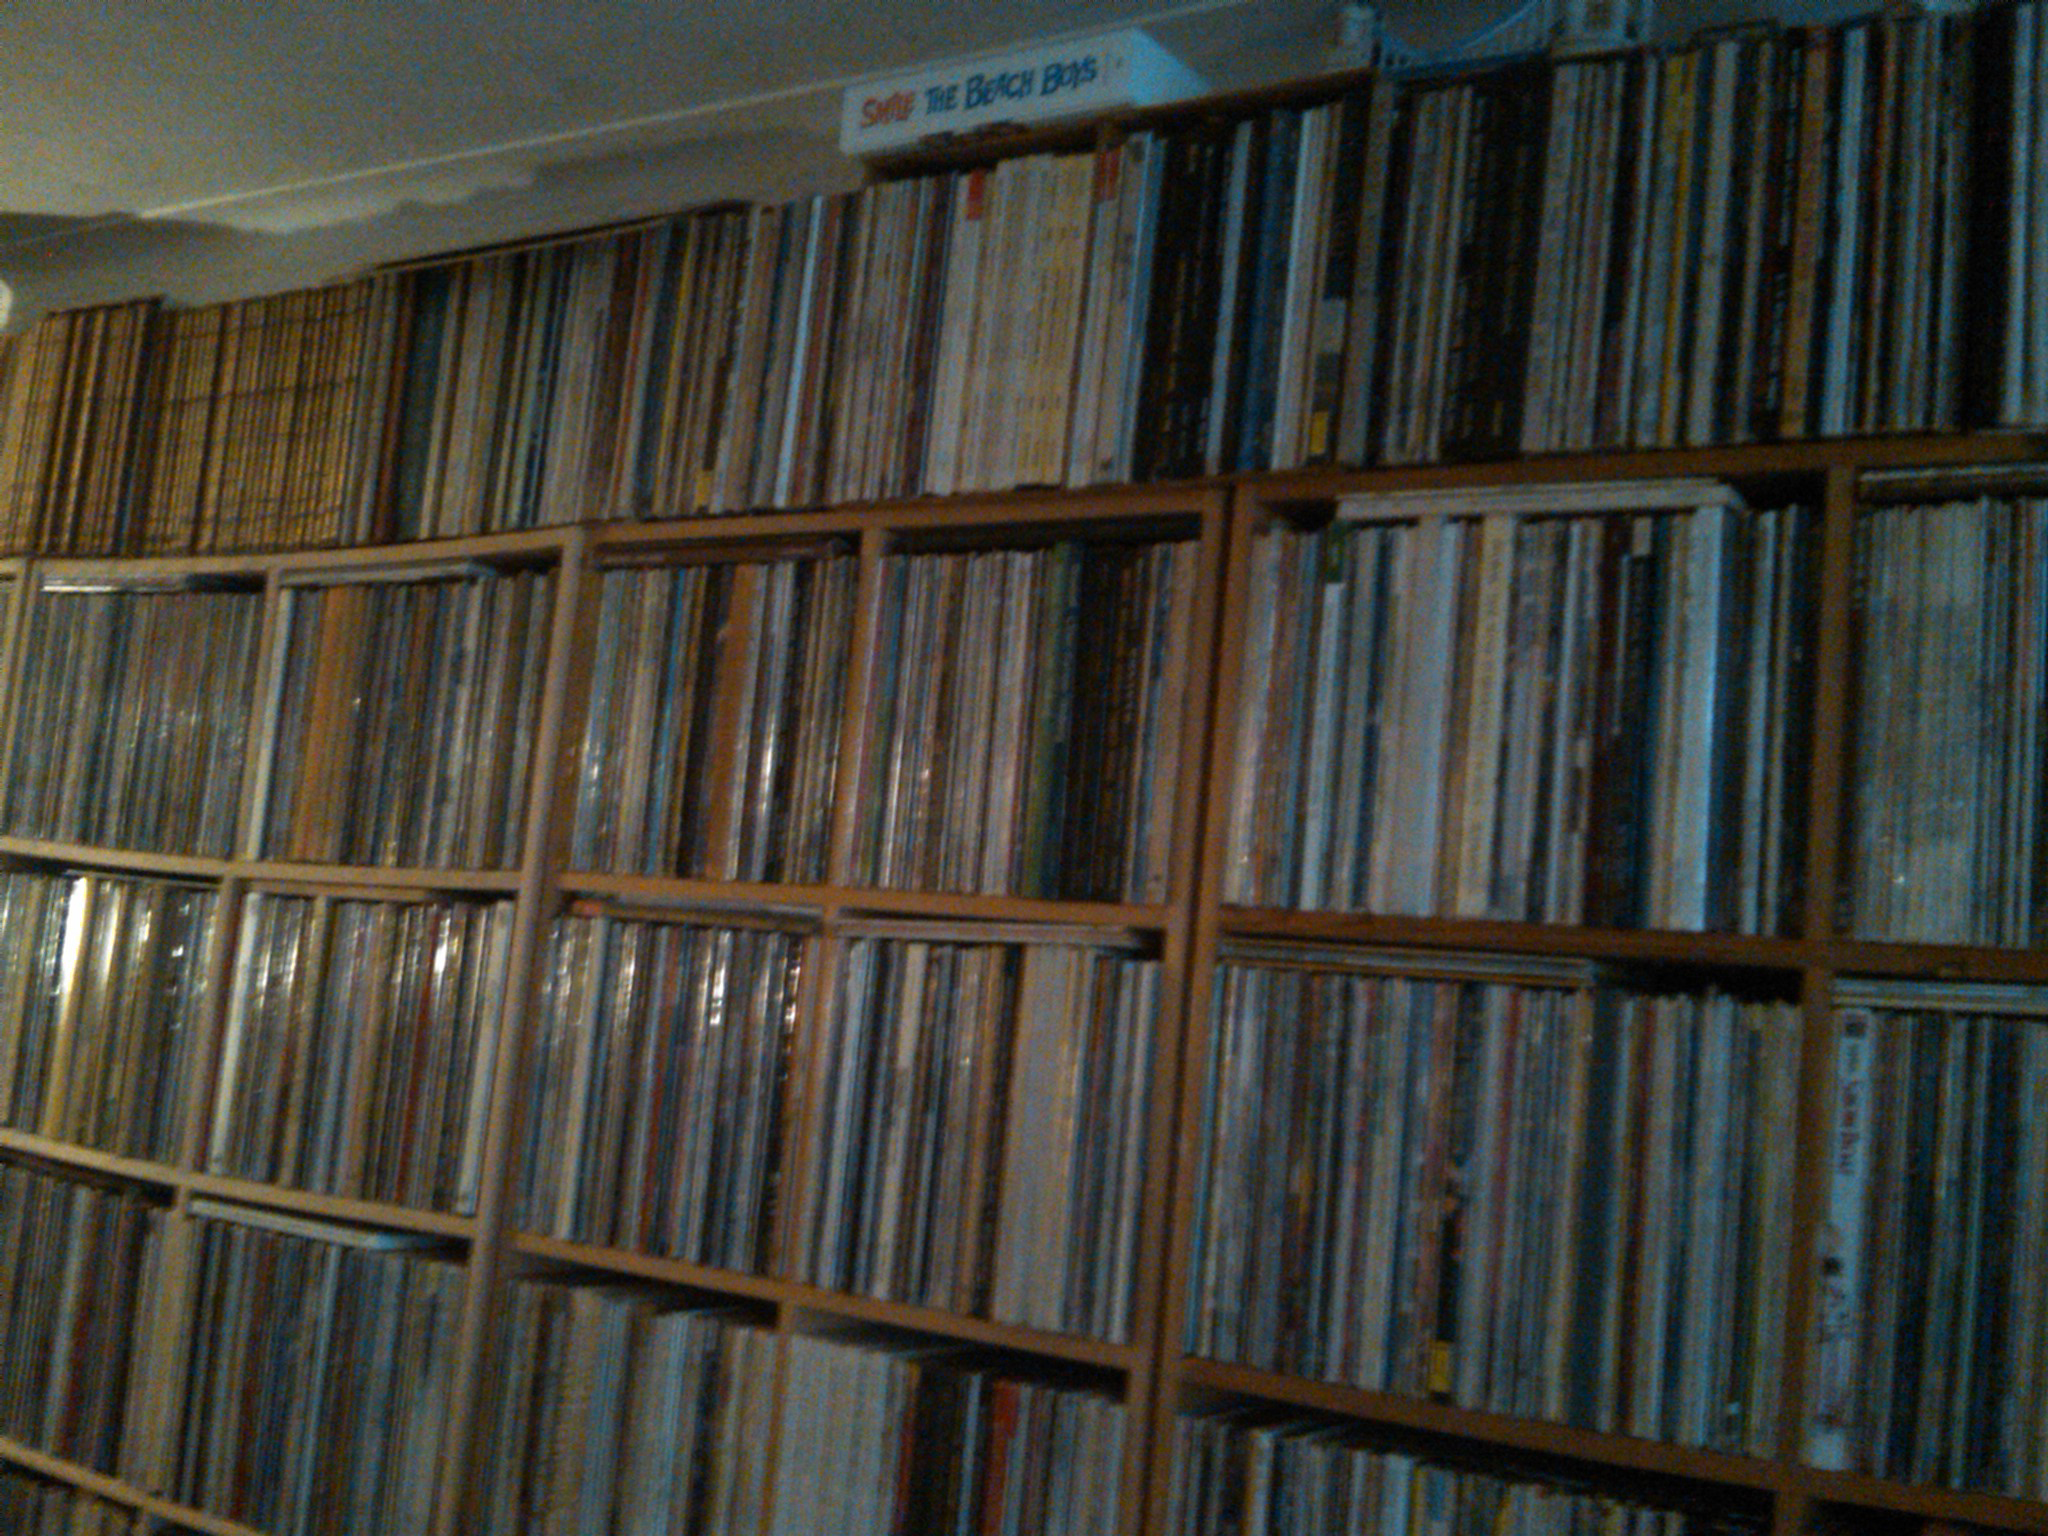 A wall of vinyl LPs with the Smile Sessions box lying horizontally on top of it.